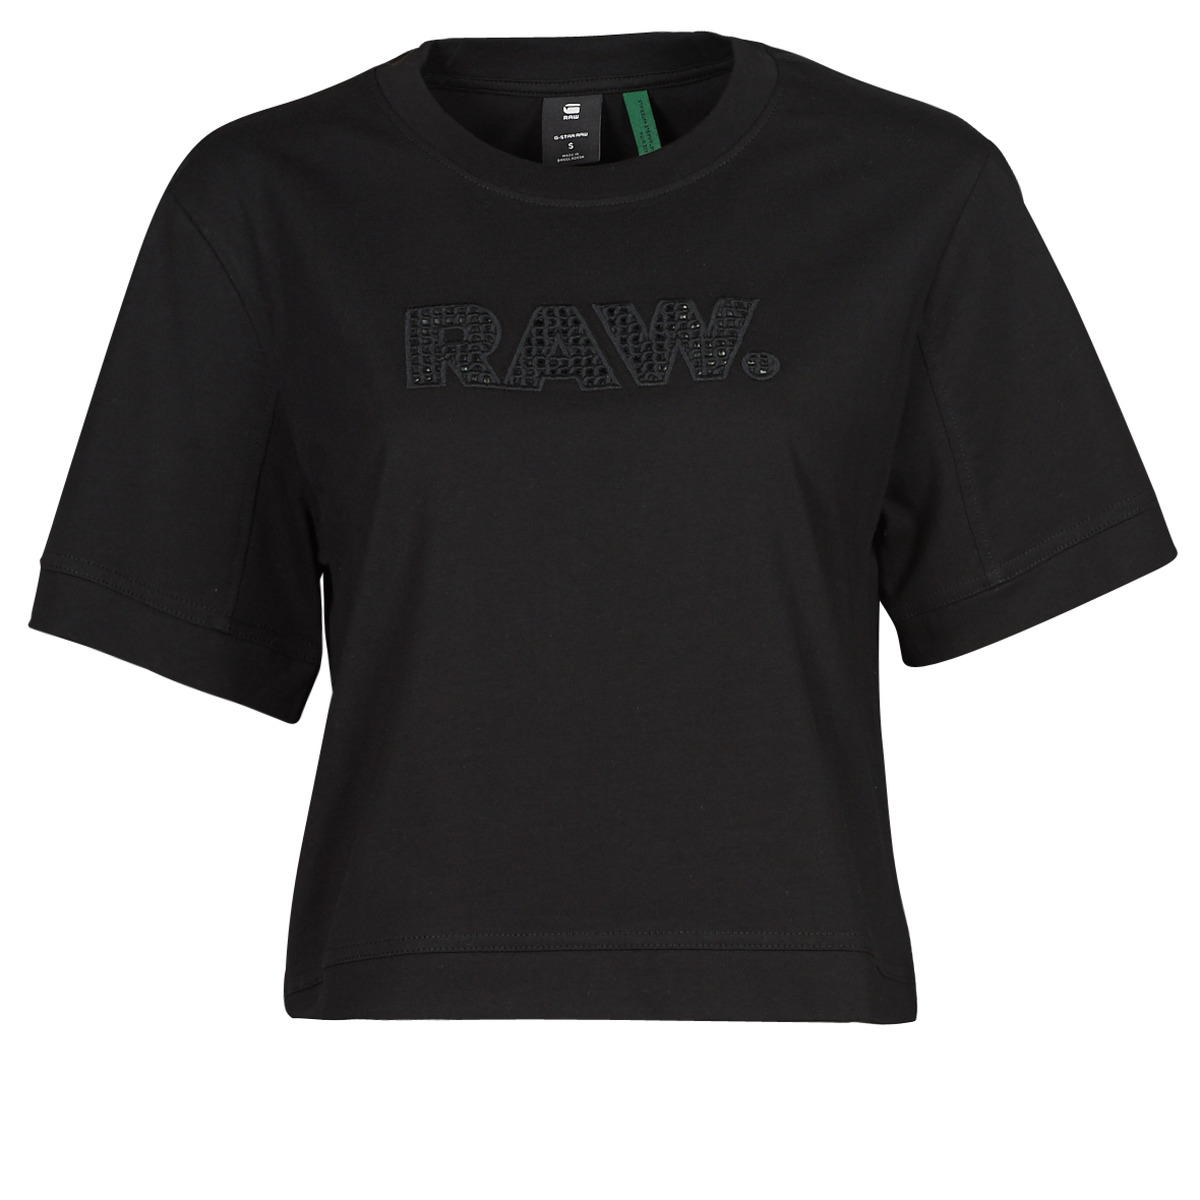 g-star raw  boxy fit raw embroidery tee  women's t shirt in black